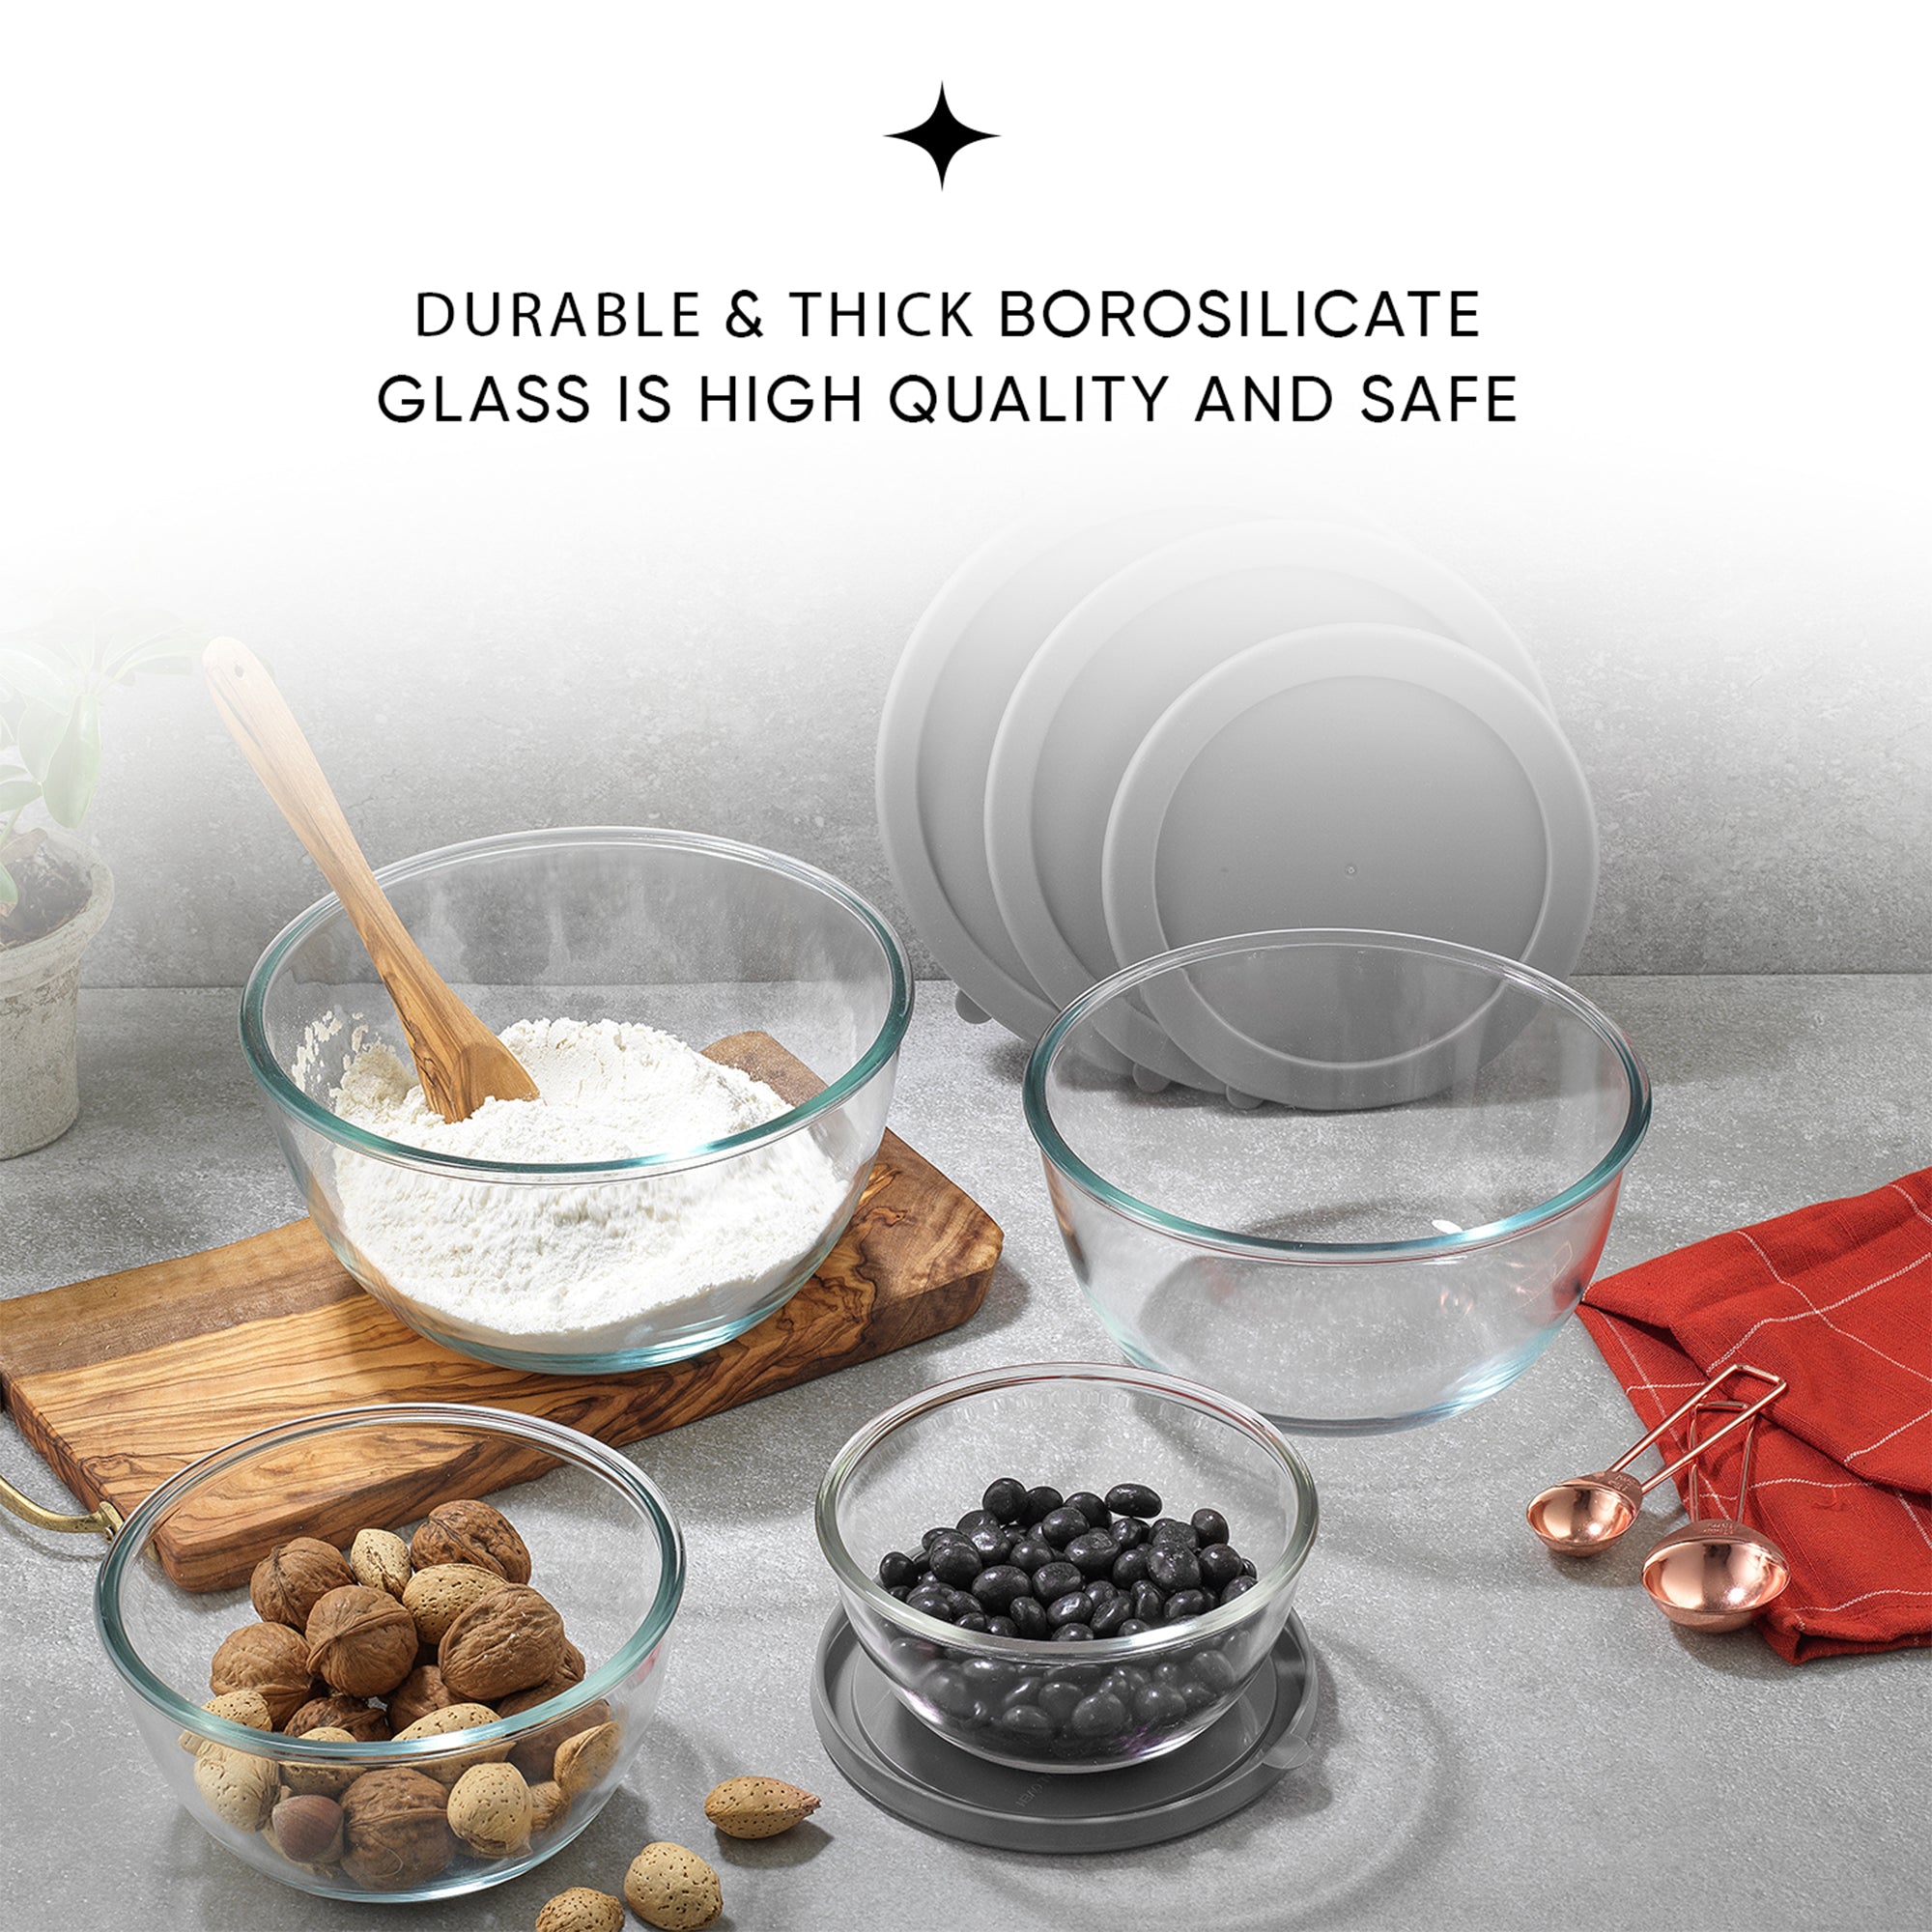 Four glass bowls filled with nuts and flour sit on a table. The bowls have gray lids next to them. Text on the image reads: "DURABLE & THICK BOROSILICATE GLASS IS HIGH QUALITY AND SAFE."